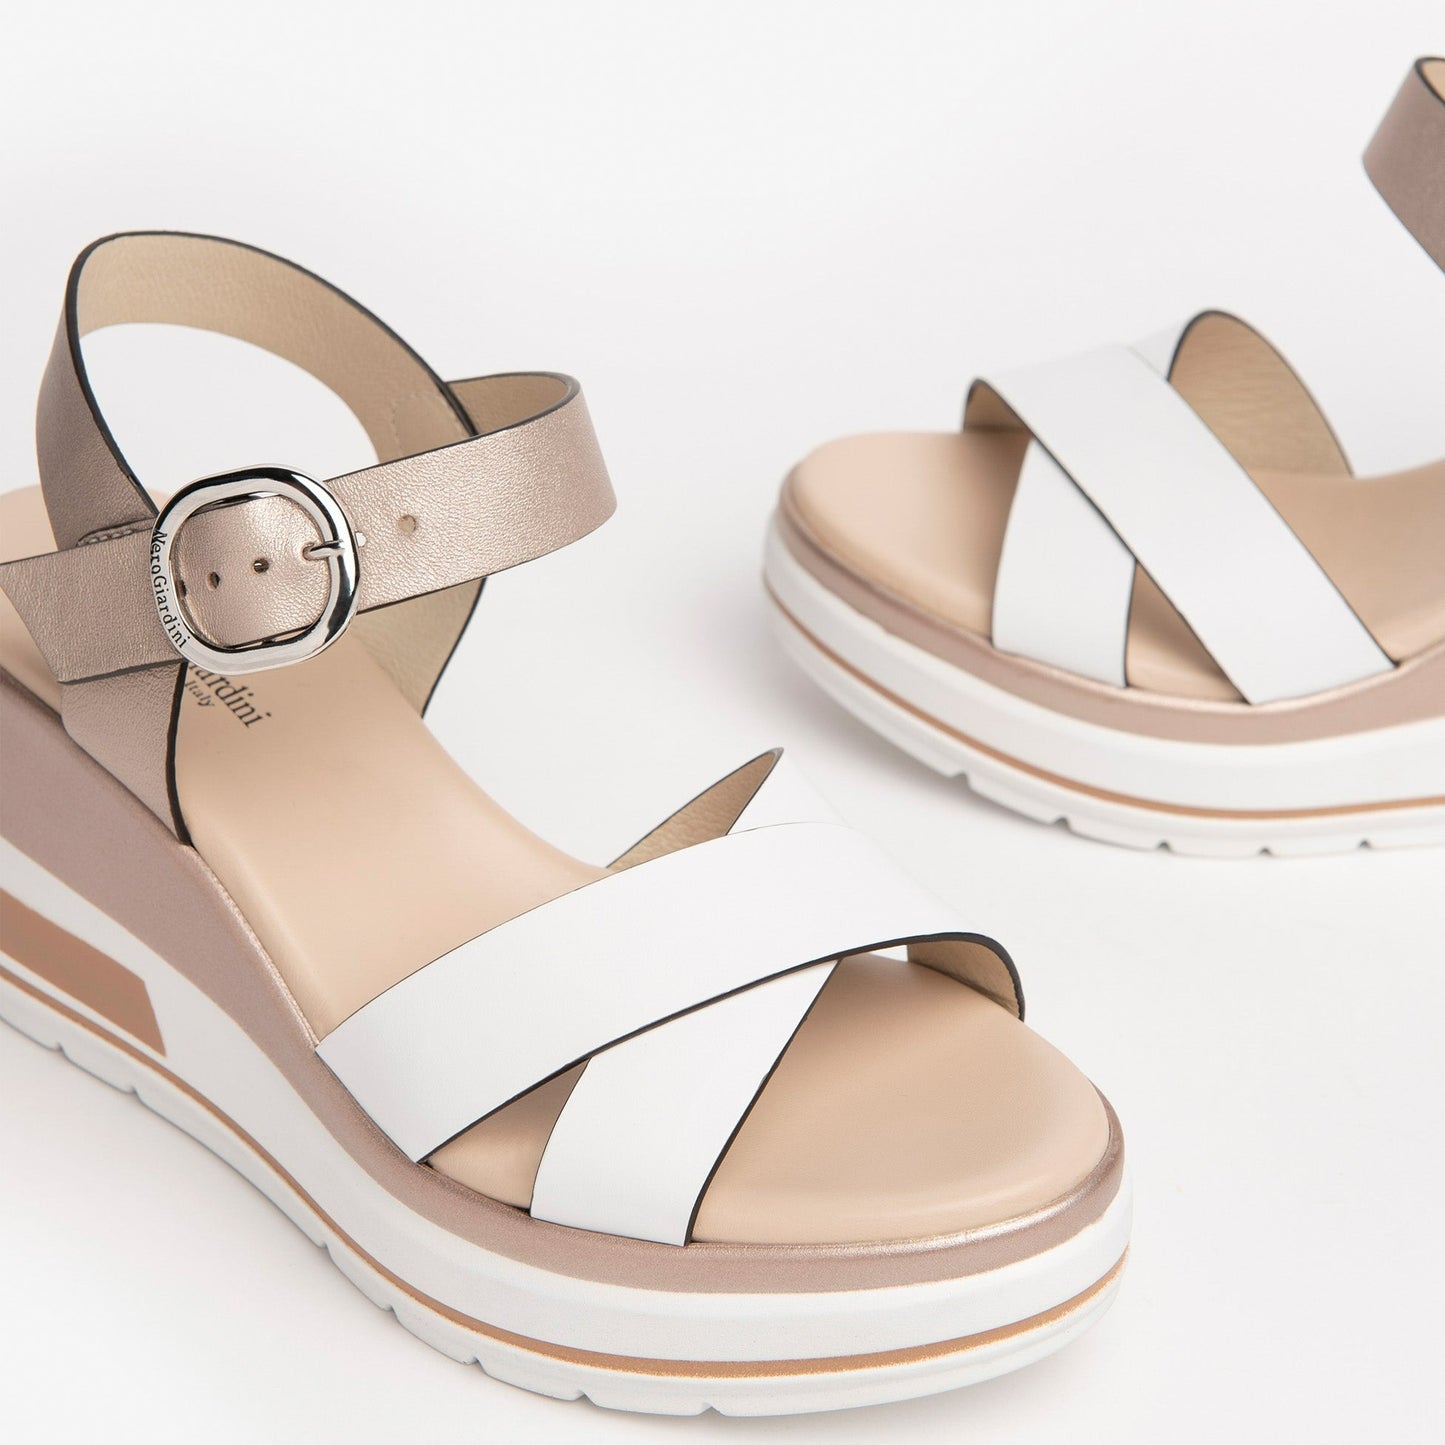 Sandals NeroGiardini women white and gold leather wedge